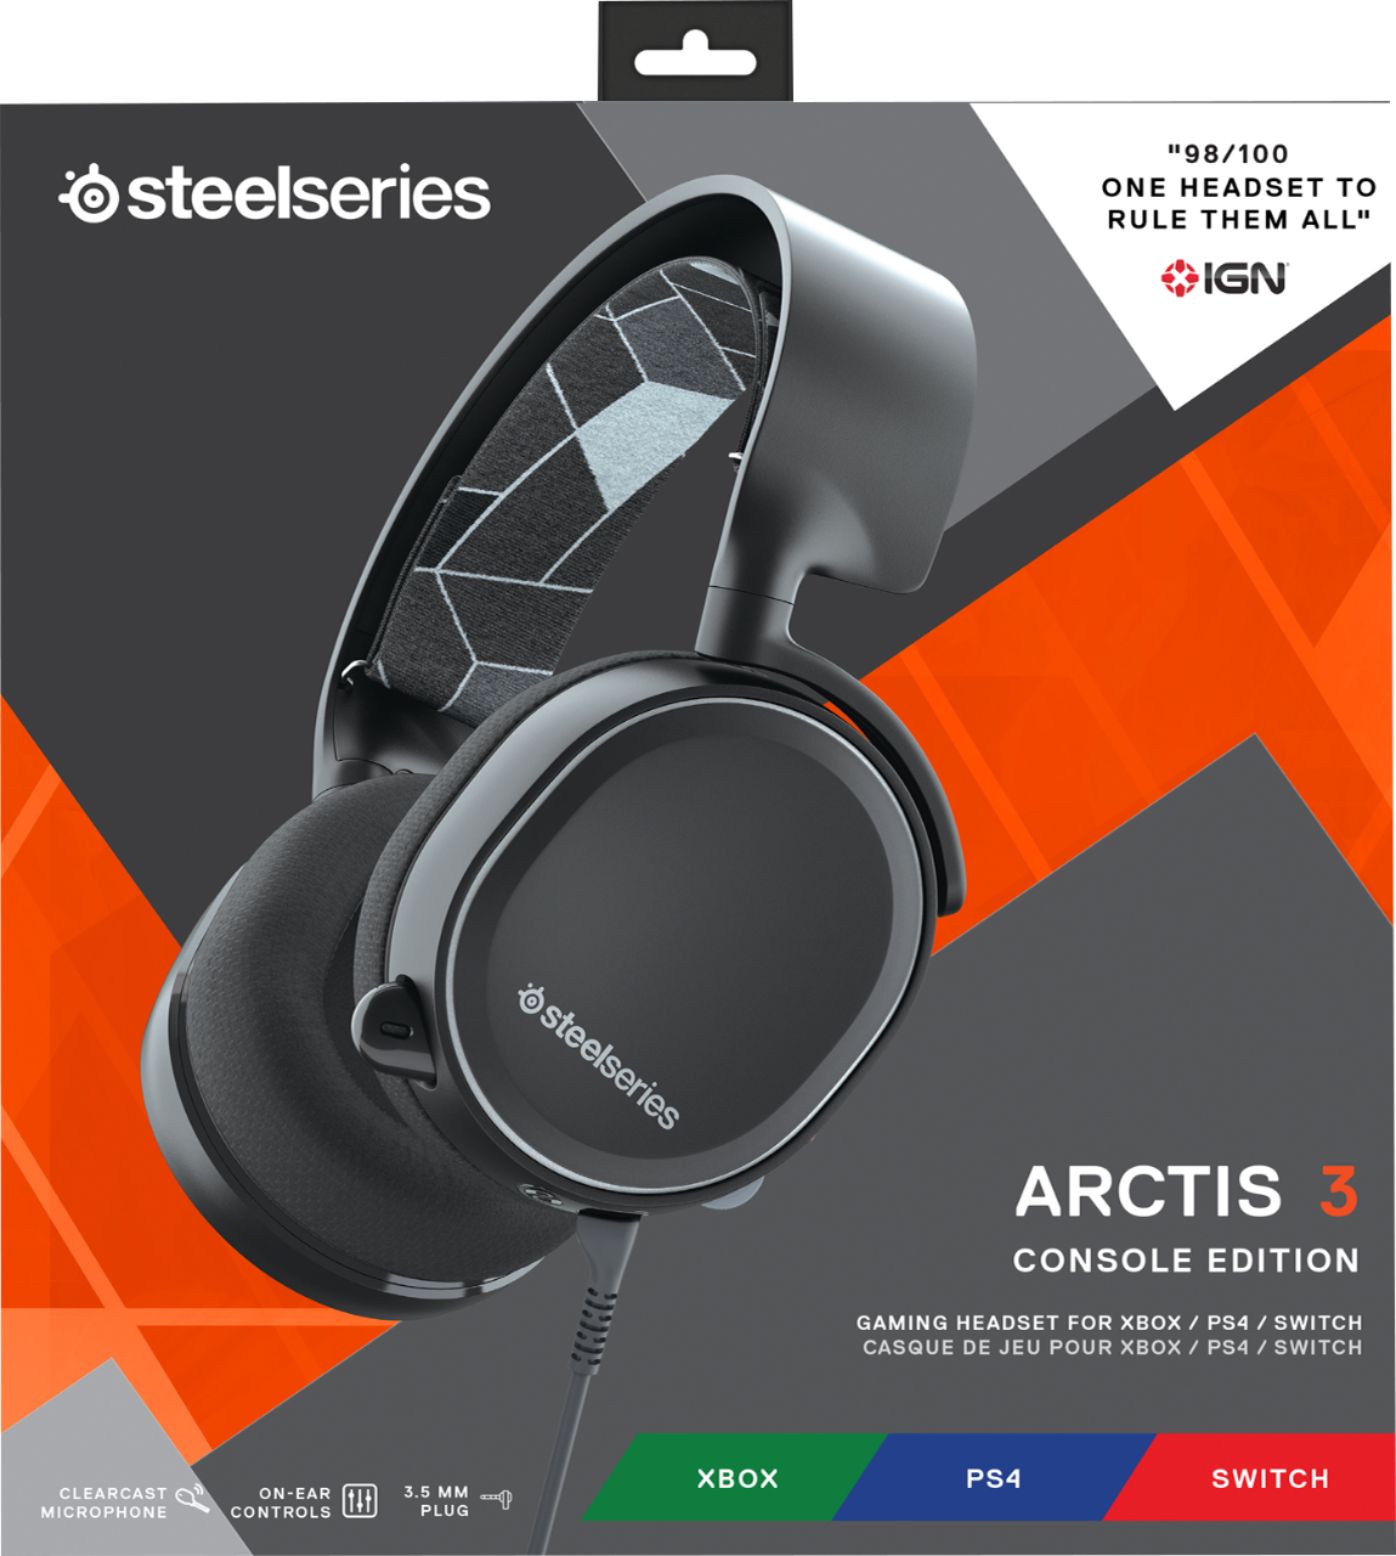 steelseries console edition